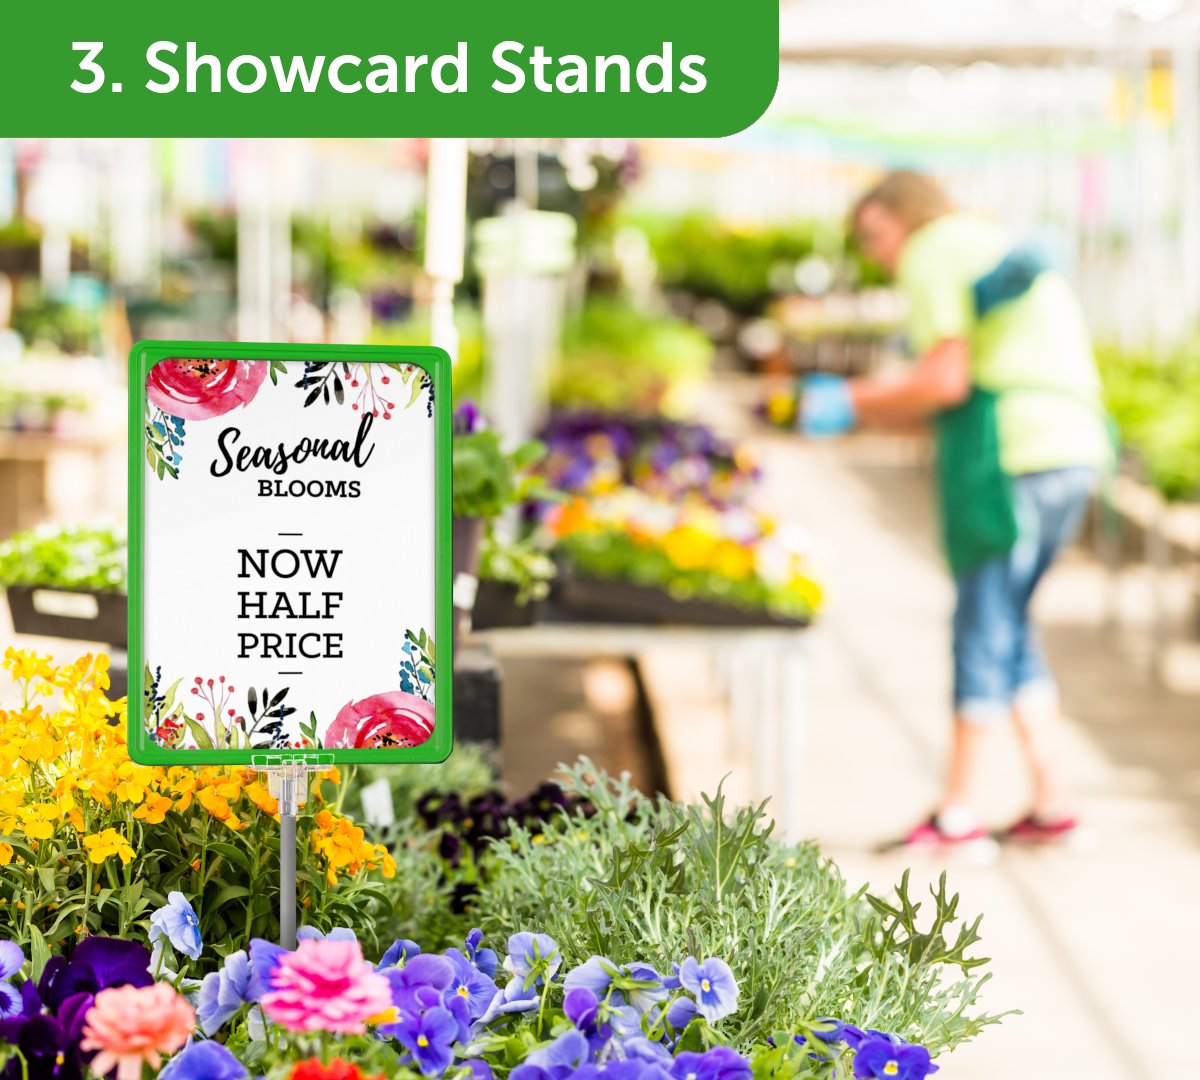 Spring will soon be upon us - prime time for garden centres to boost sales! Make sure your products are clearly visible and appealing to customers using these essential point-of-sale displays. ukpos.com/point-of-sale-… 
#gardencentredisplay #gardencentres #gardencentreretail